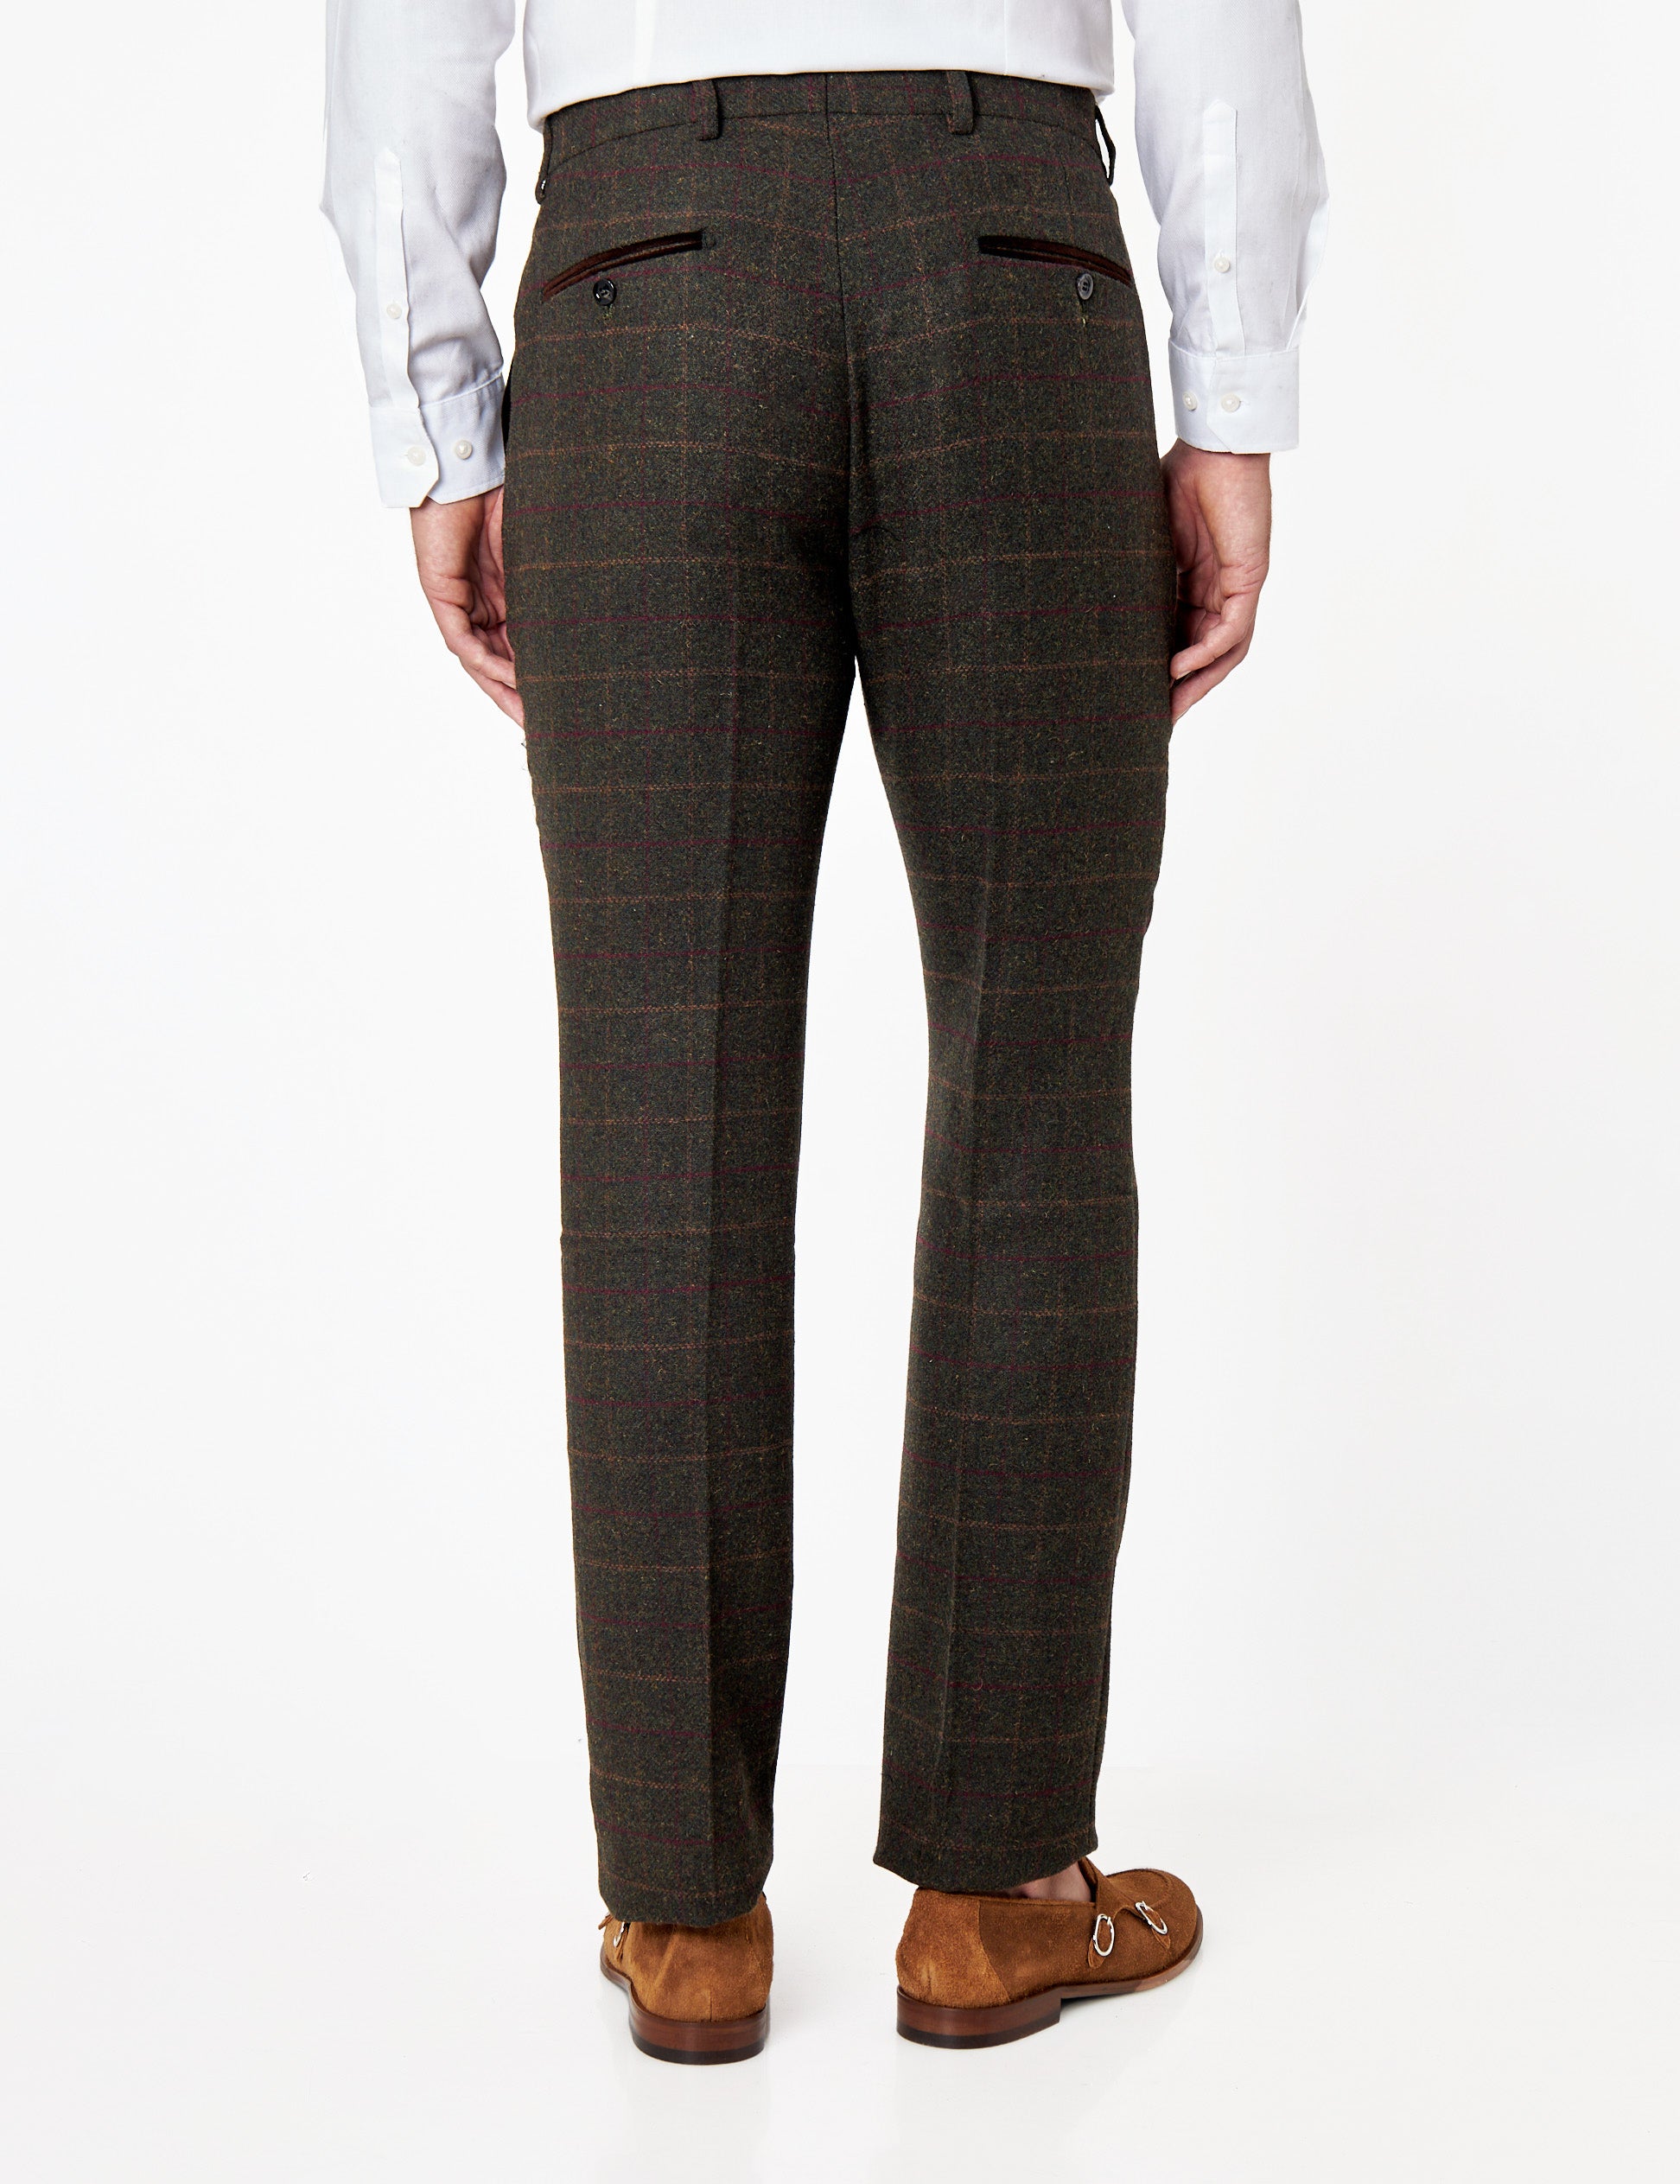 VITORI A2 - Mens Green Vintage Styled Check Herringbone Tailored Fit Trousers